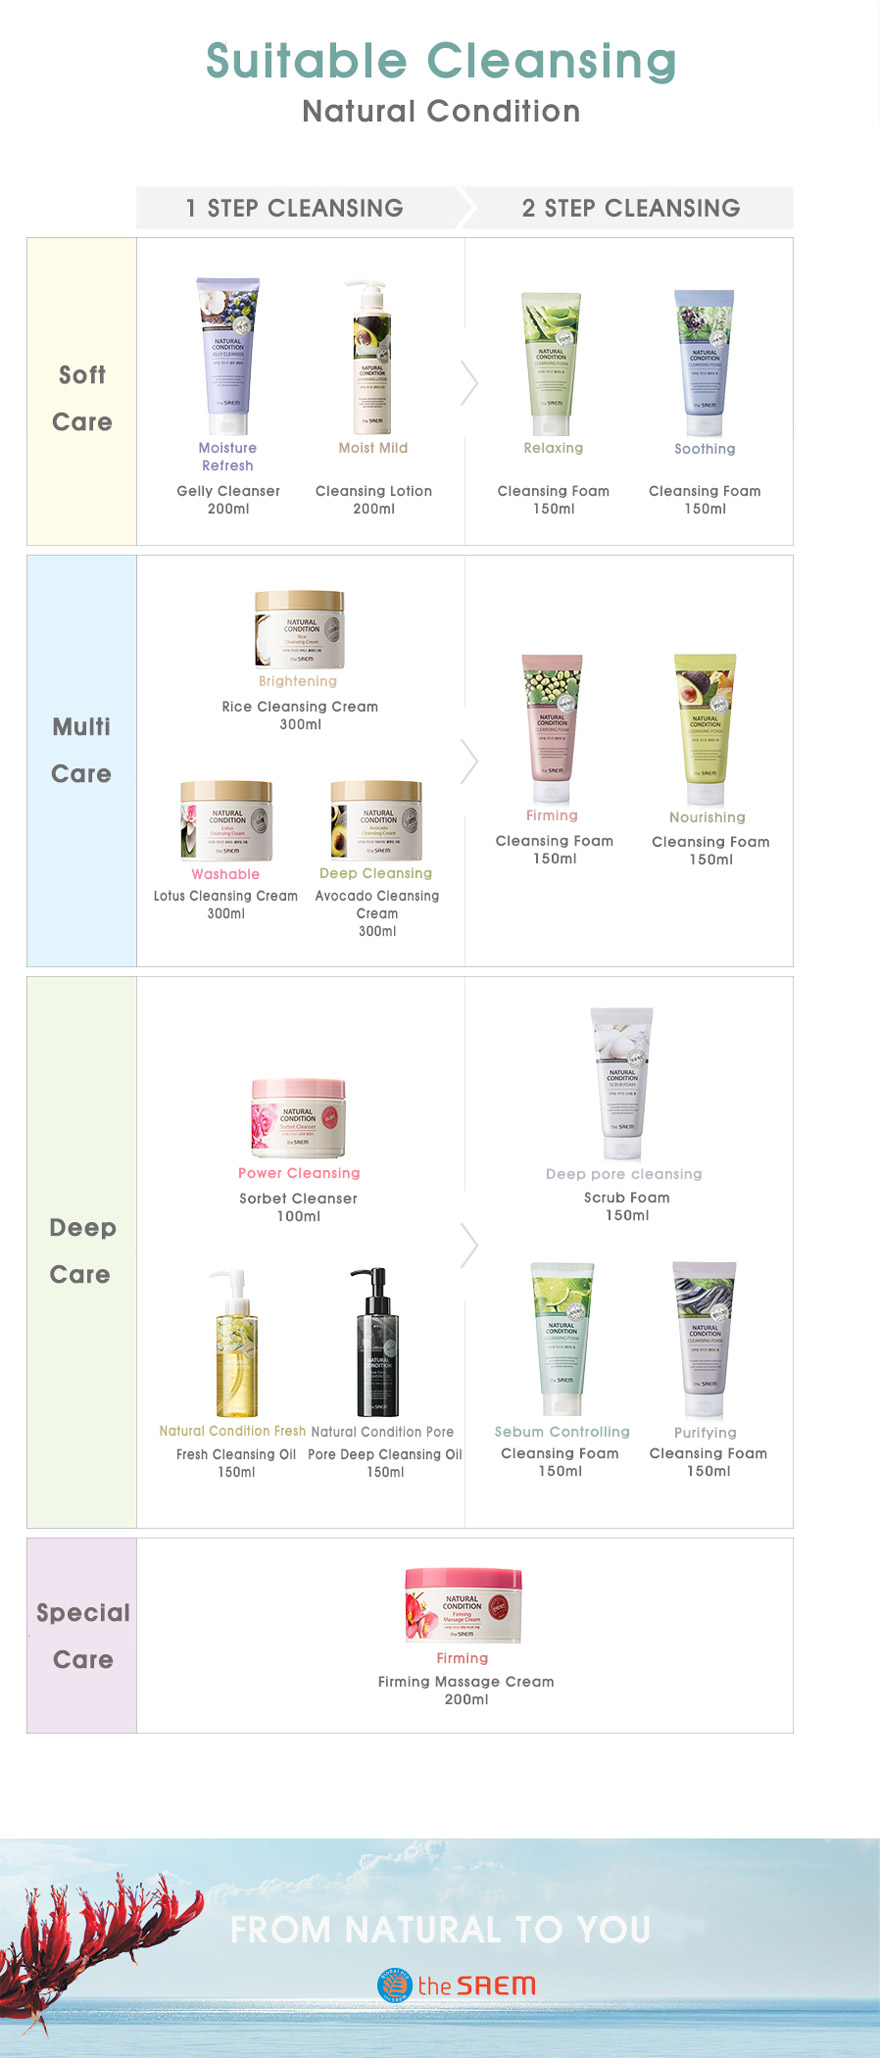 [The saem] Natural Condition Cleansing Scrub Foam #Deep Pore Cleansing 150ml